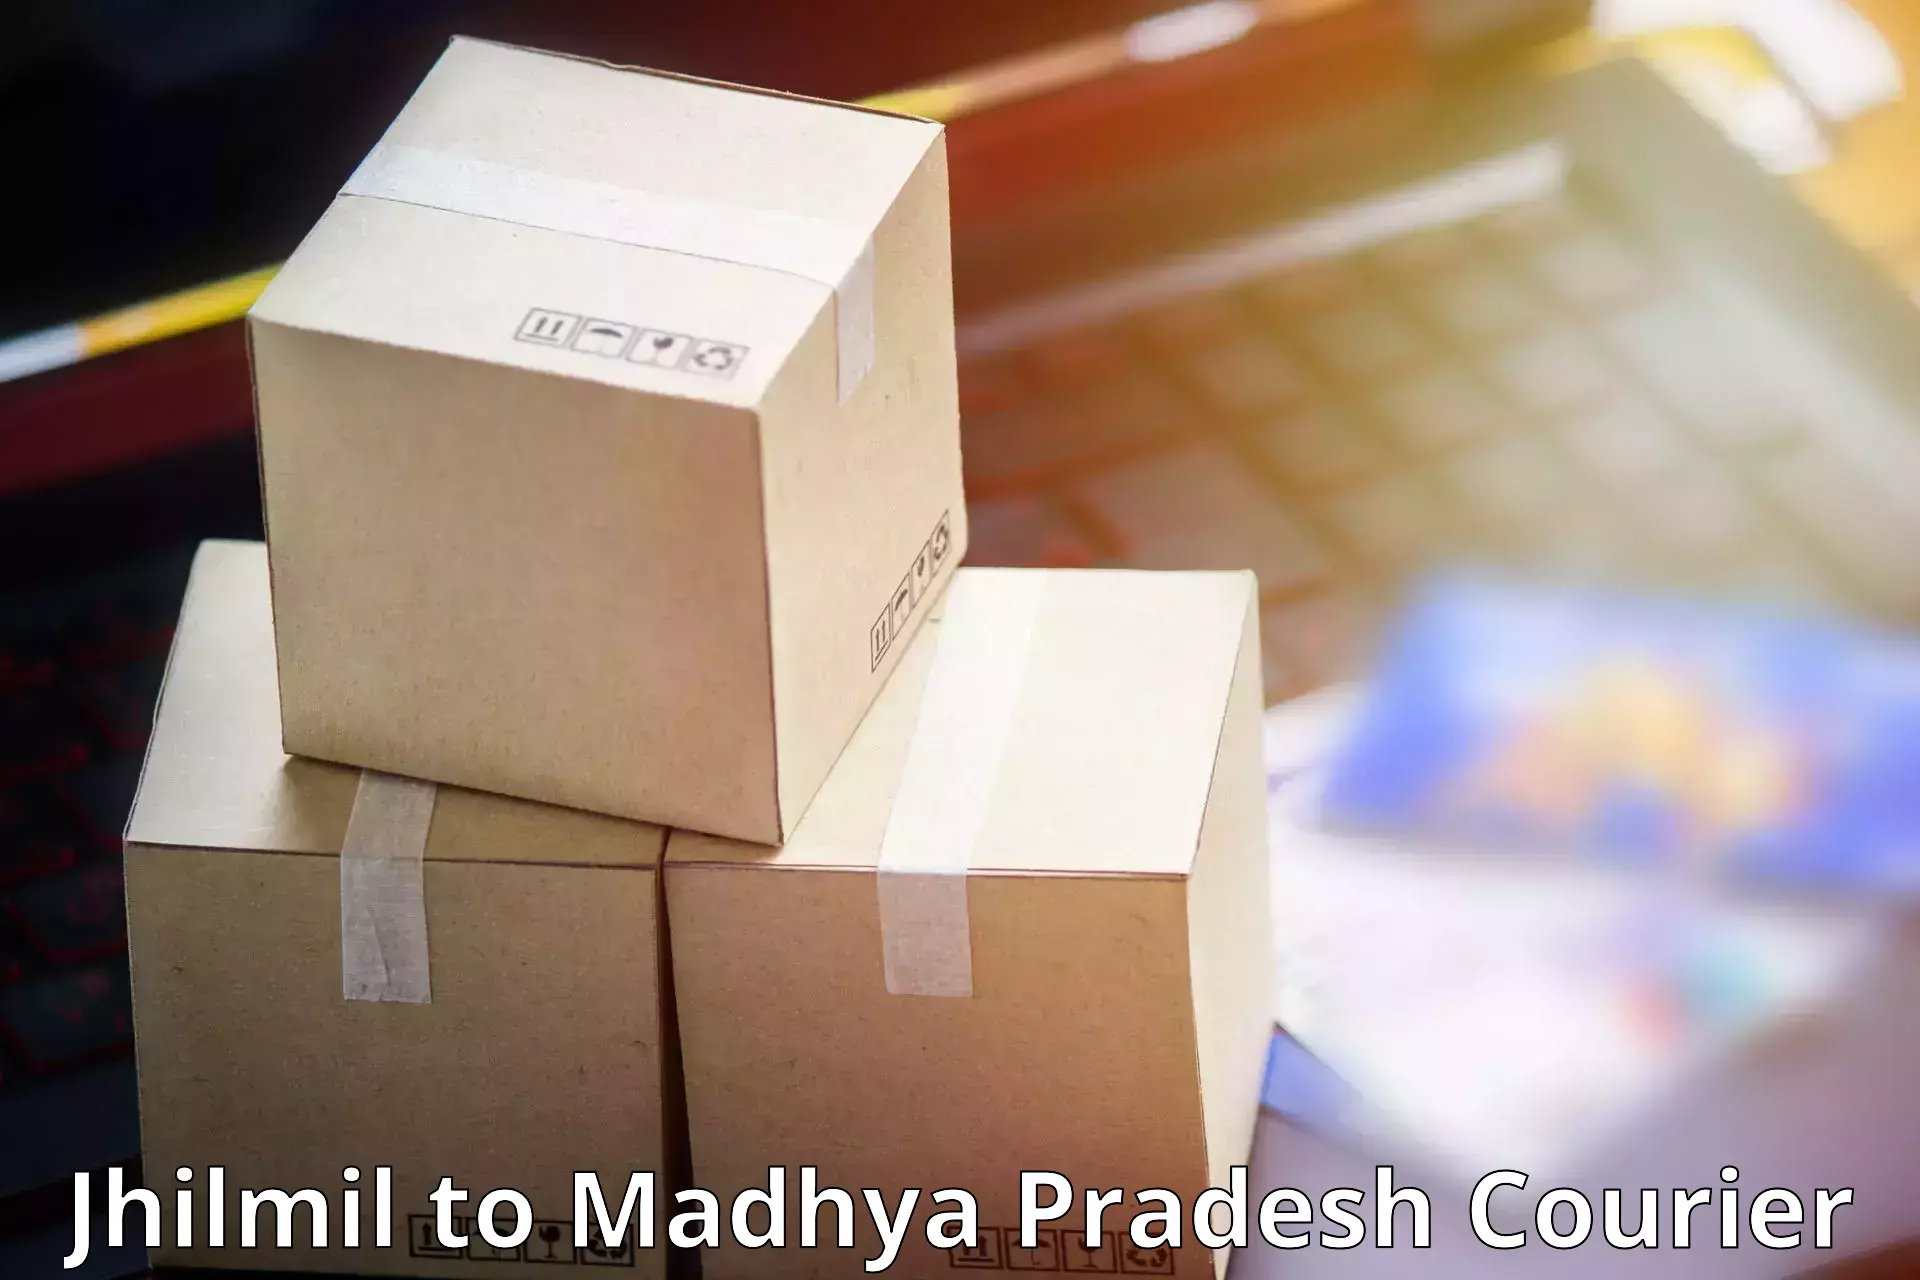 State-of-the-art courier technology Jhilmil to Sehore